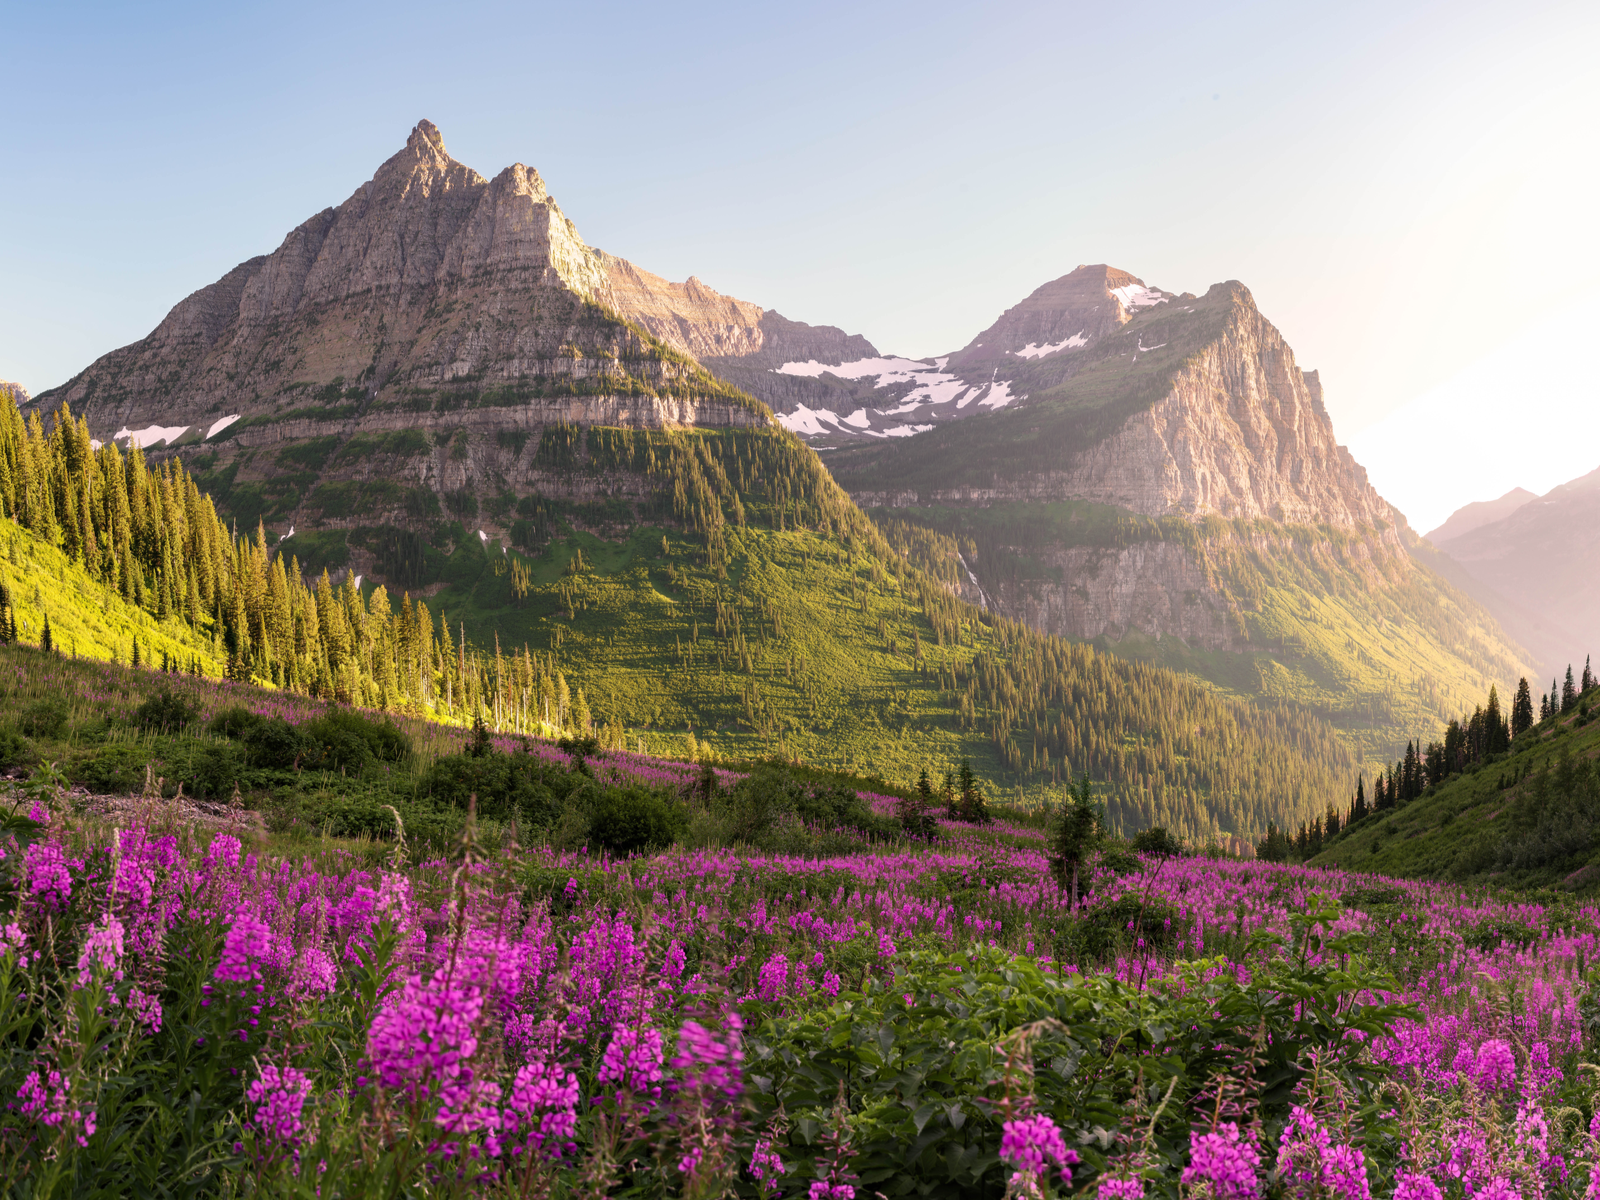 Glacier National Park looking gorgeous with purple flowers in the valley pictured during the best time to visit Montana